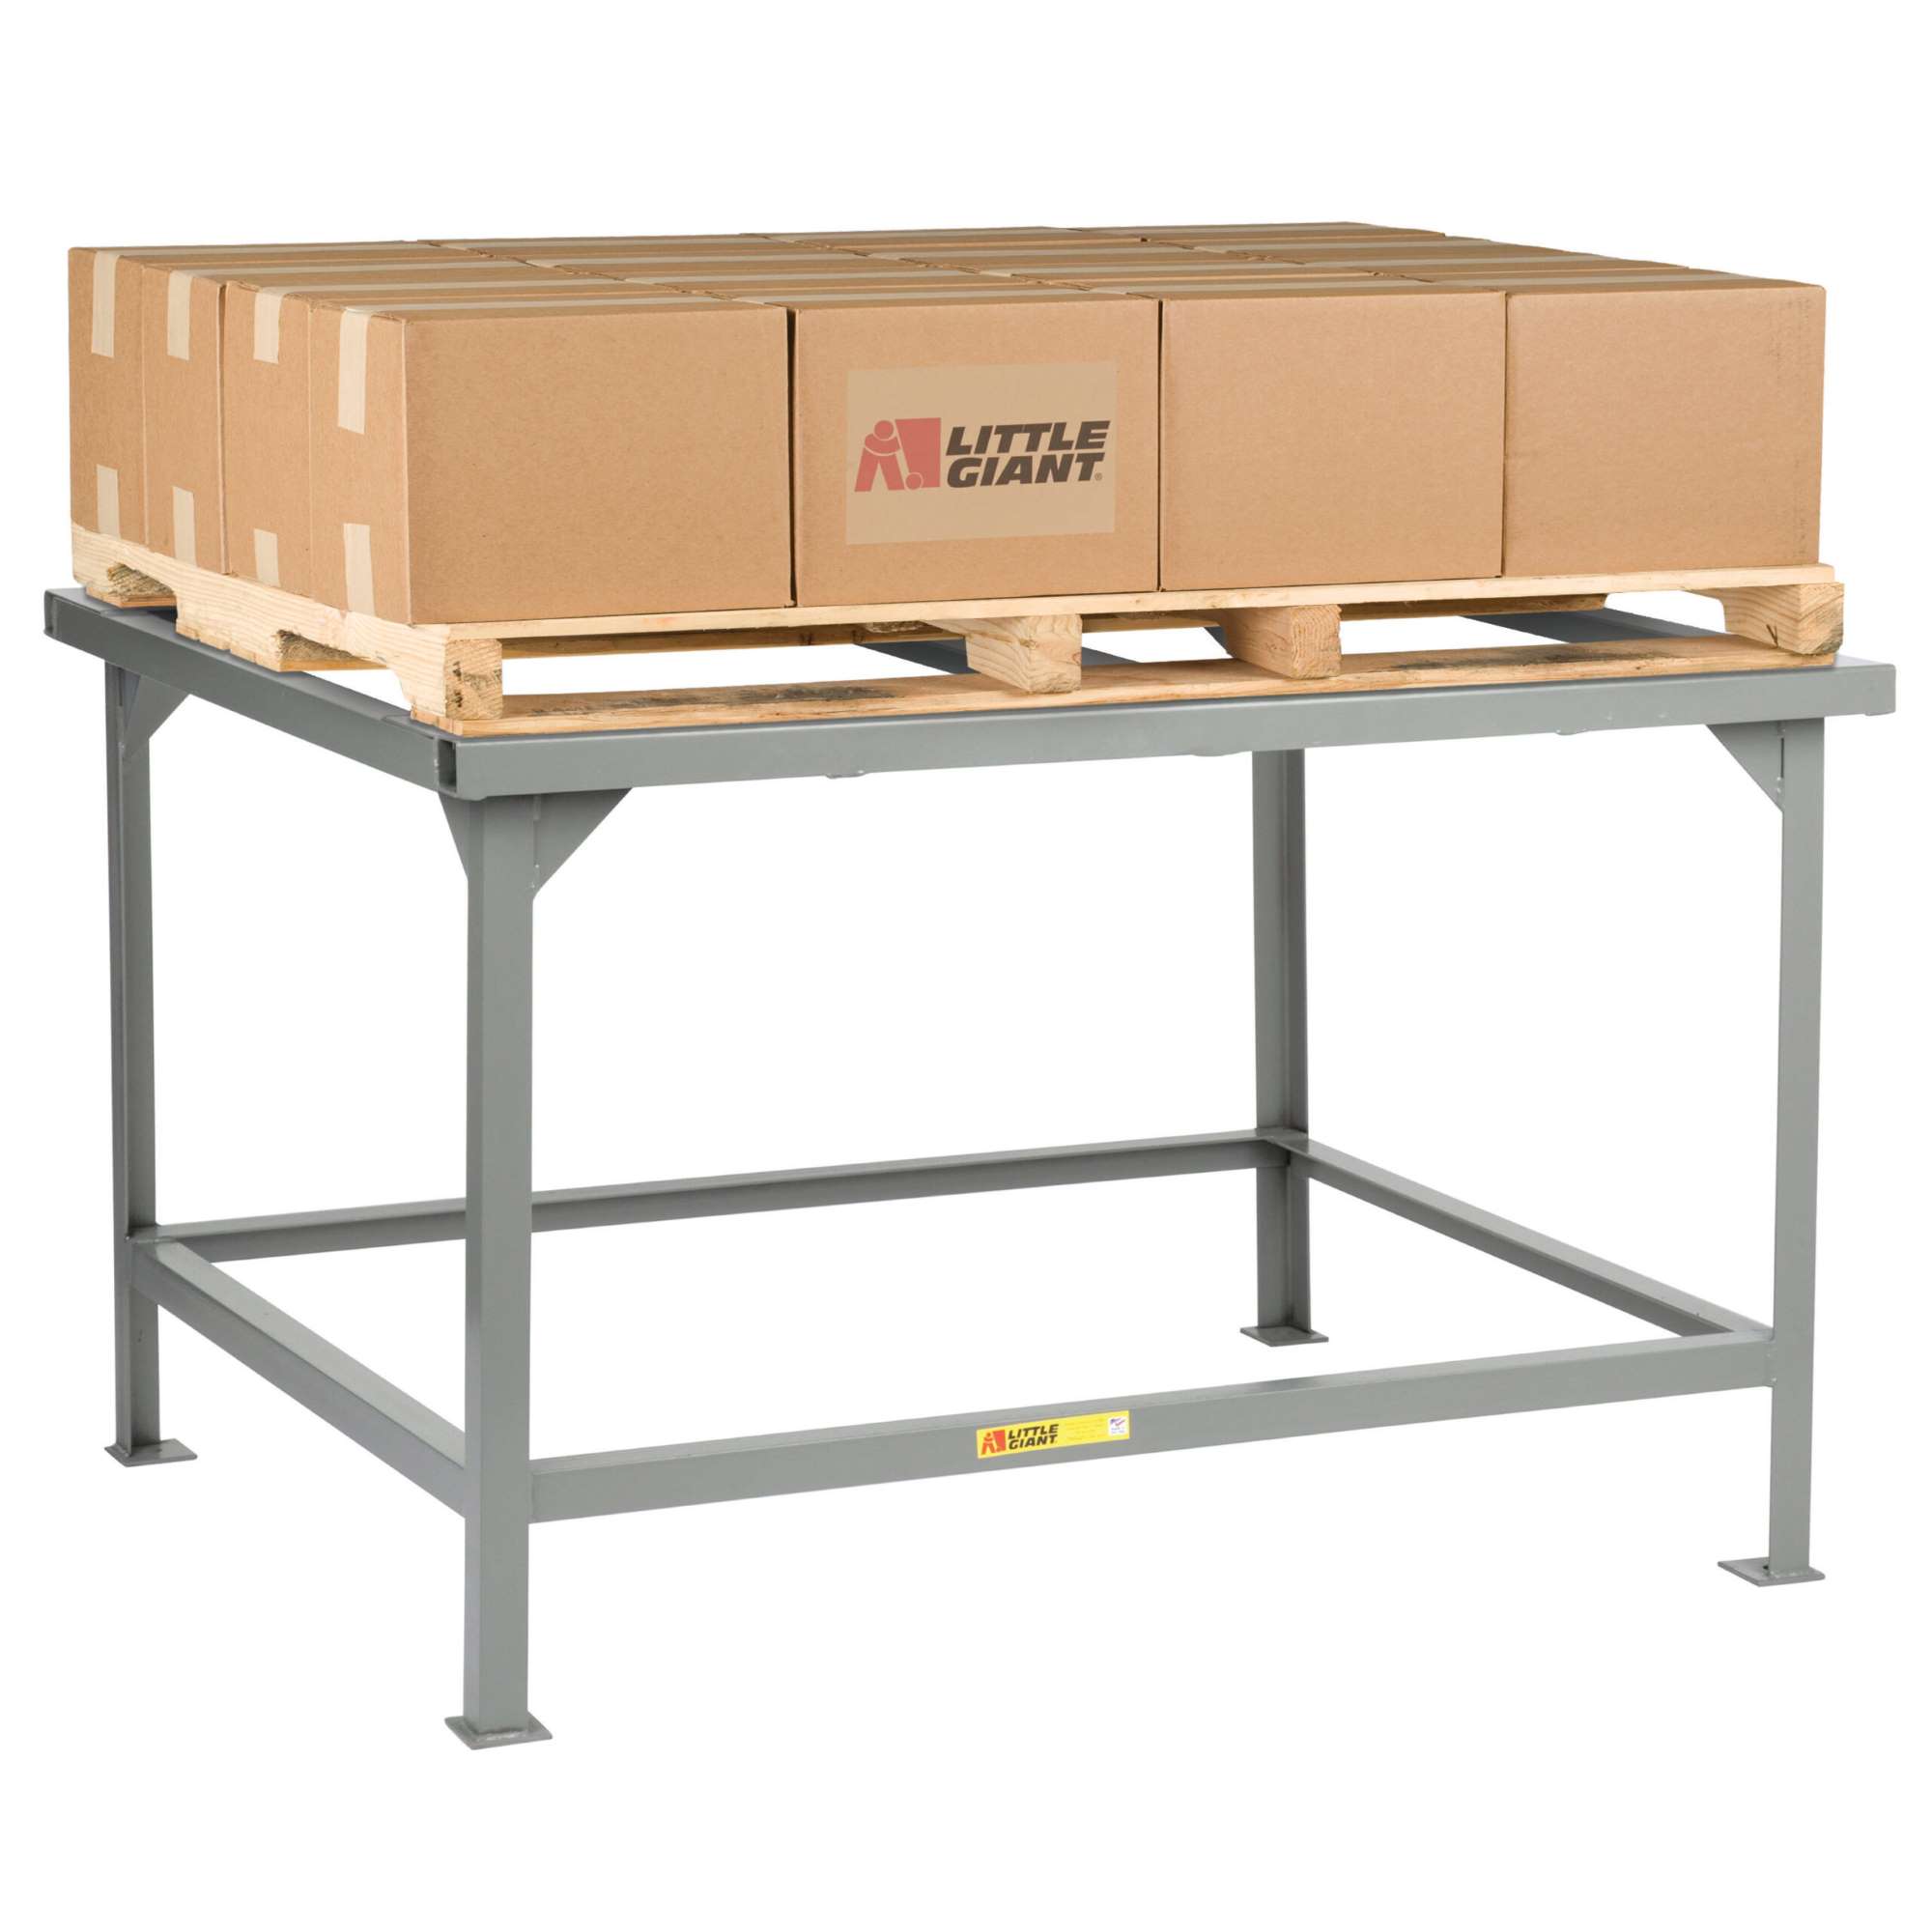 Little Giant stationary pallet stand, 4000 lbs capacity, Fixed 30" height, Adjustable in 2" increments